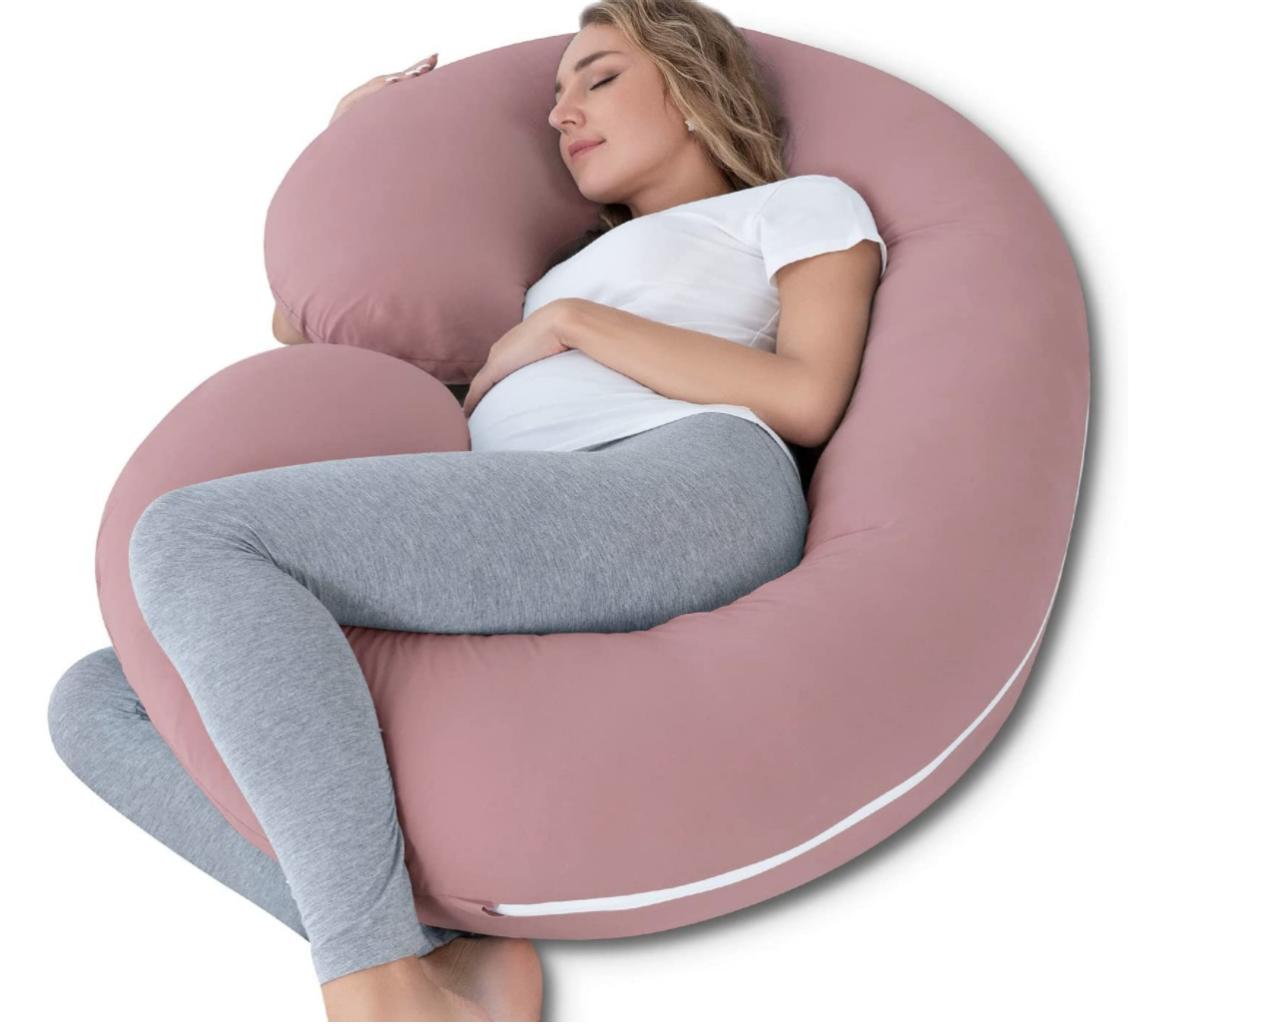 The Best Pregnancy Pillows According to Real Moms - FamilyEducation